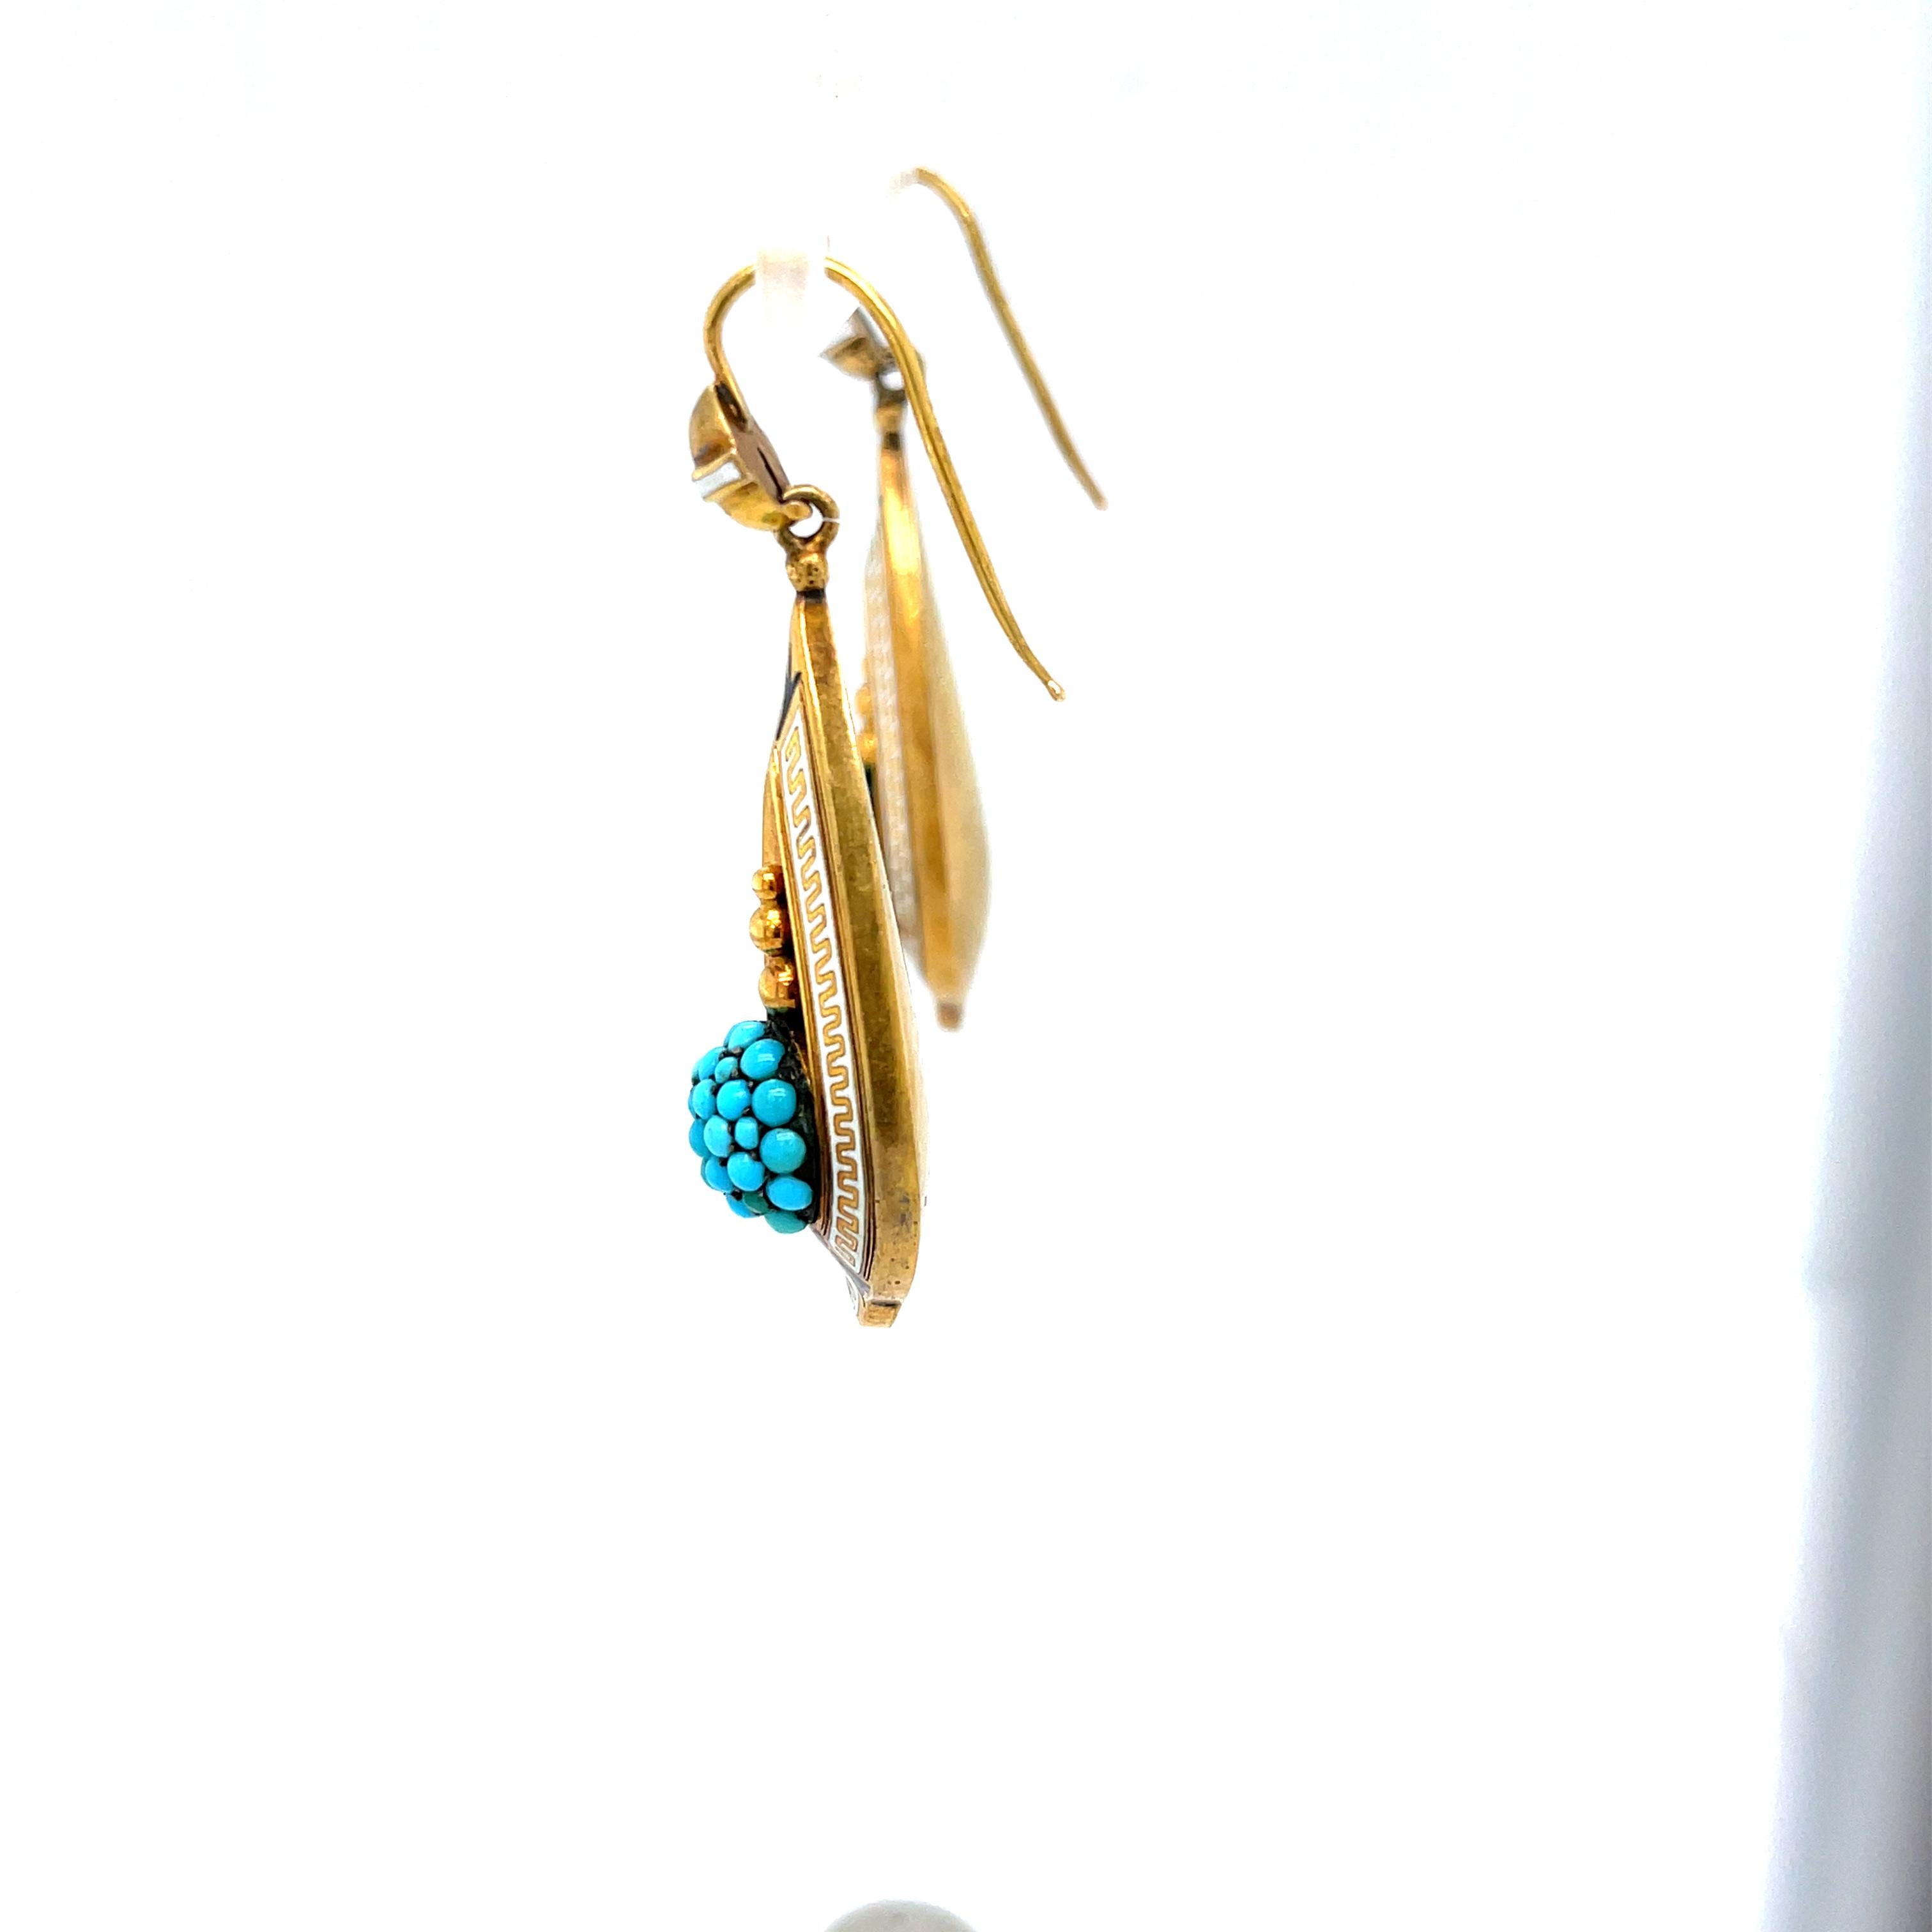 Antique hollow form 18k yellow gold dart shaped ear pendants with turquoise and enamel, circa 1880. These earrings have wonderful dimension and shape. The turquoise ball part is well done and the Greek key white enamel around the edges is a true